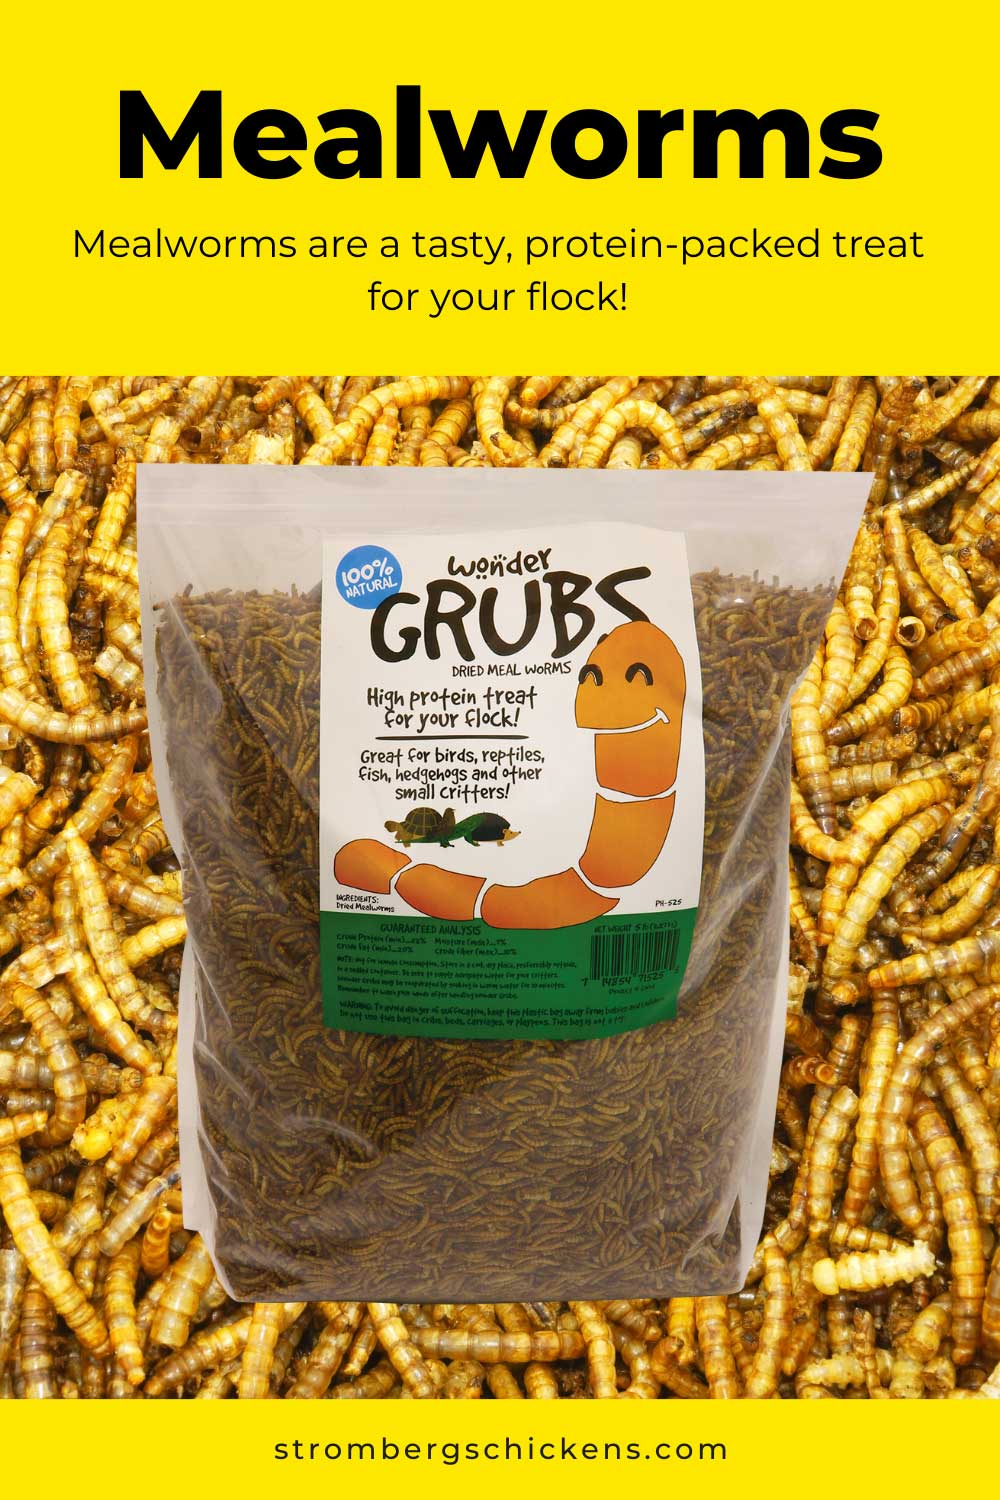 Mealworms are a tasty, protein-packed treat for your flock!